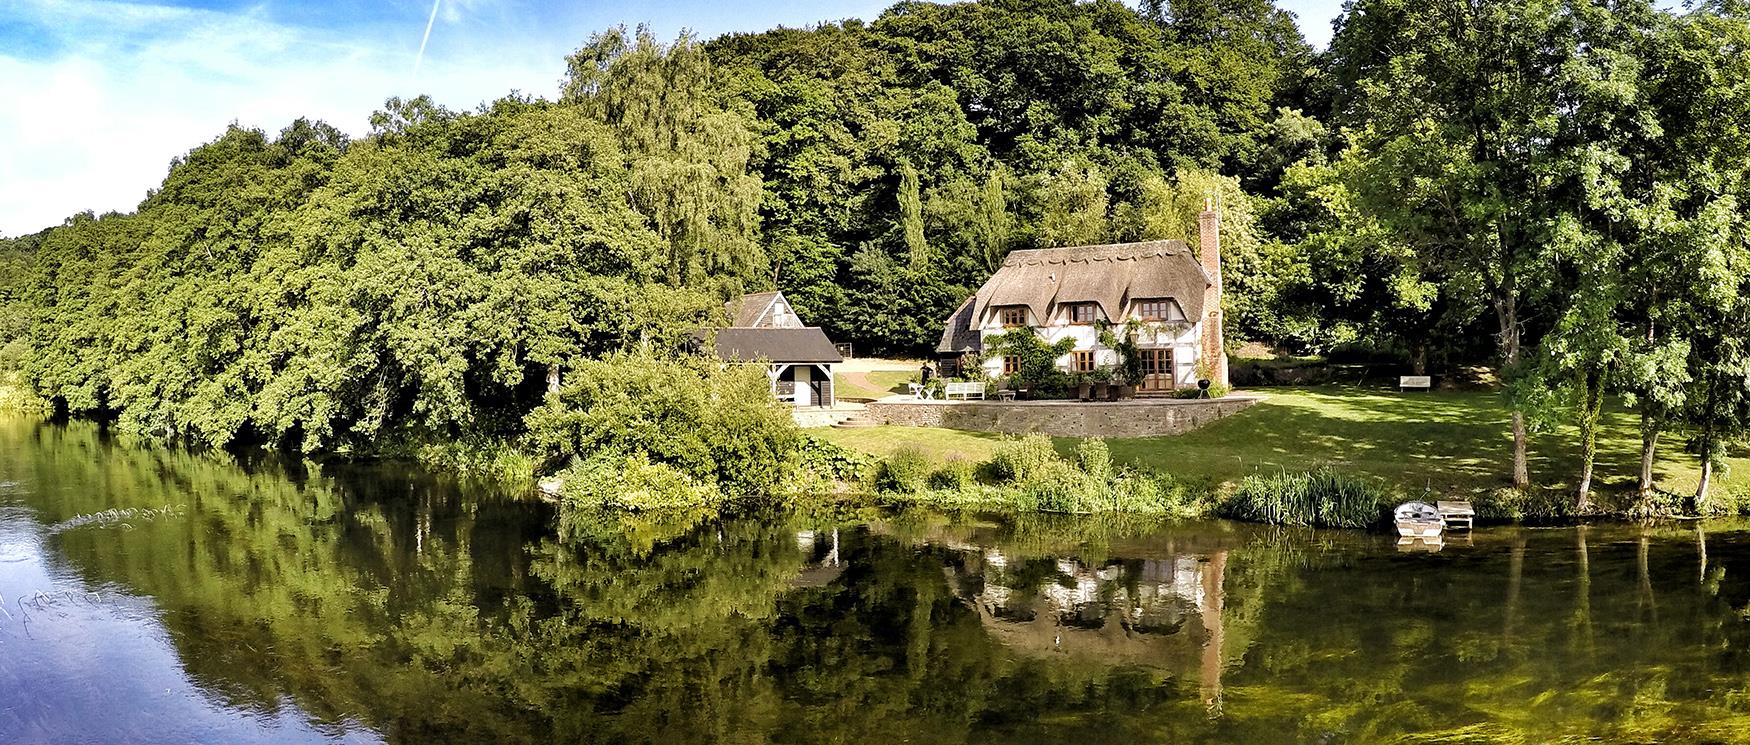 Luxury Holiday Cottages in Hampshire